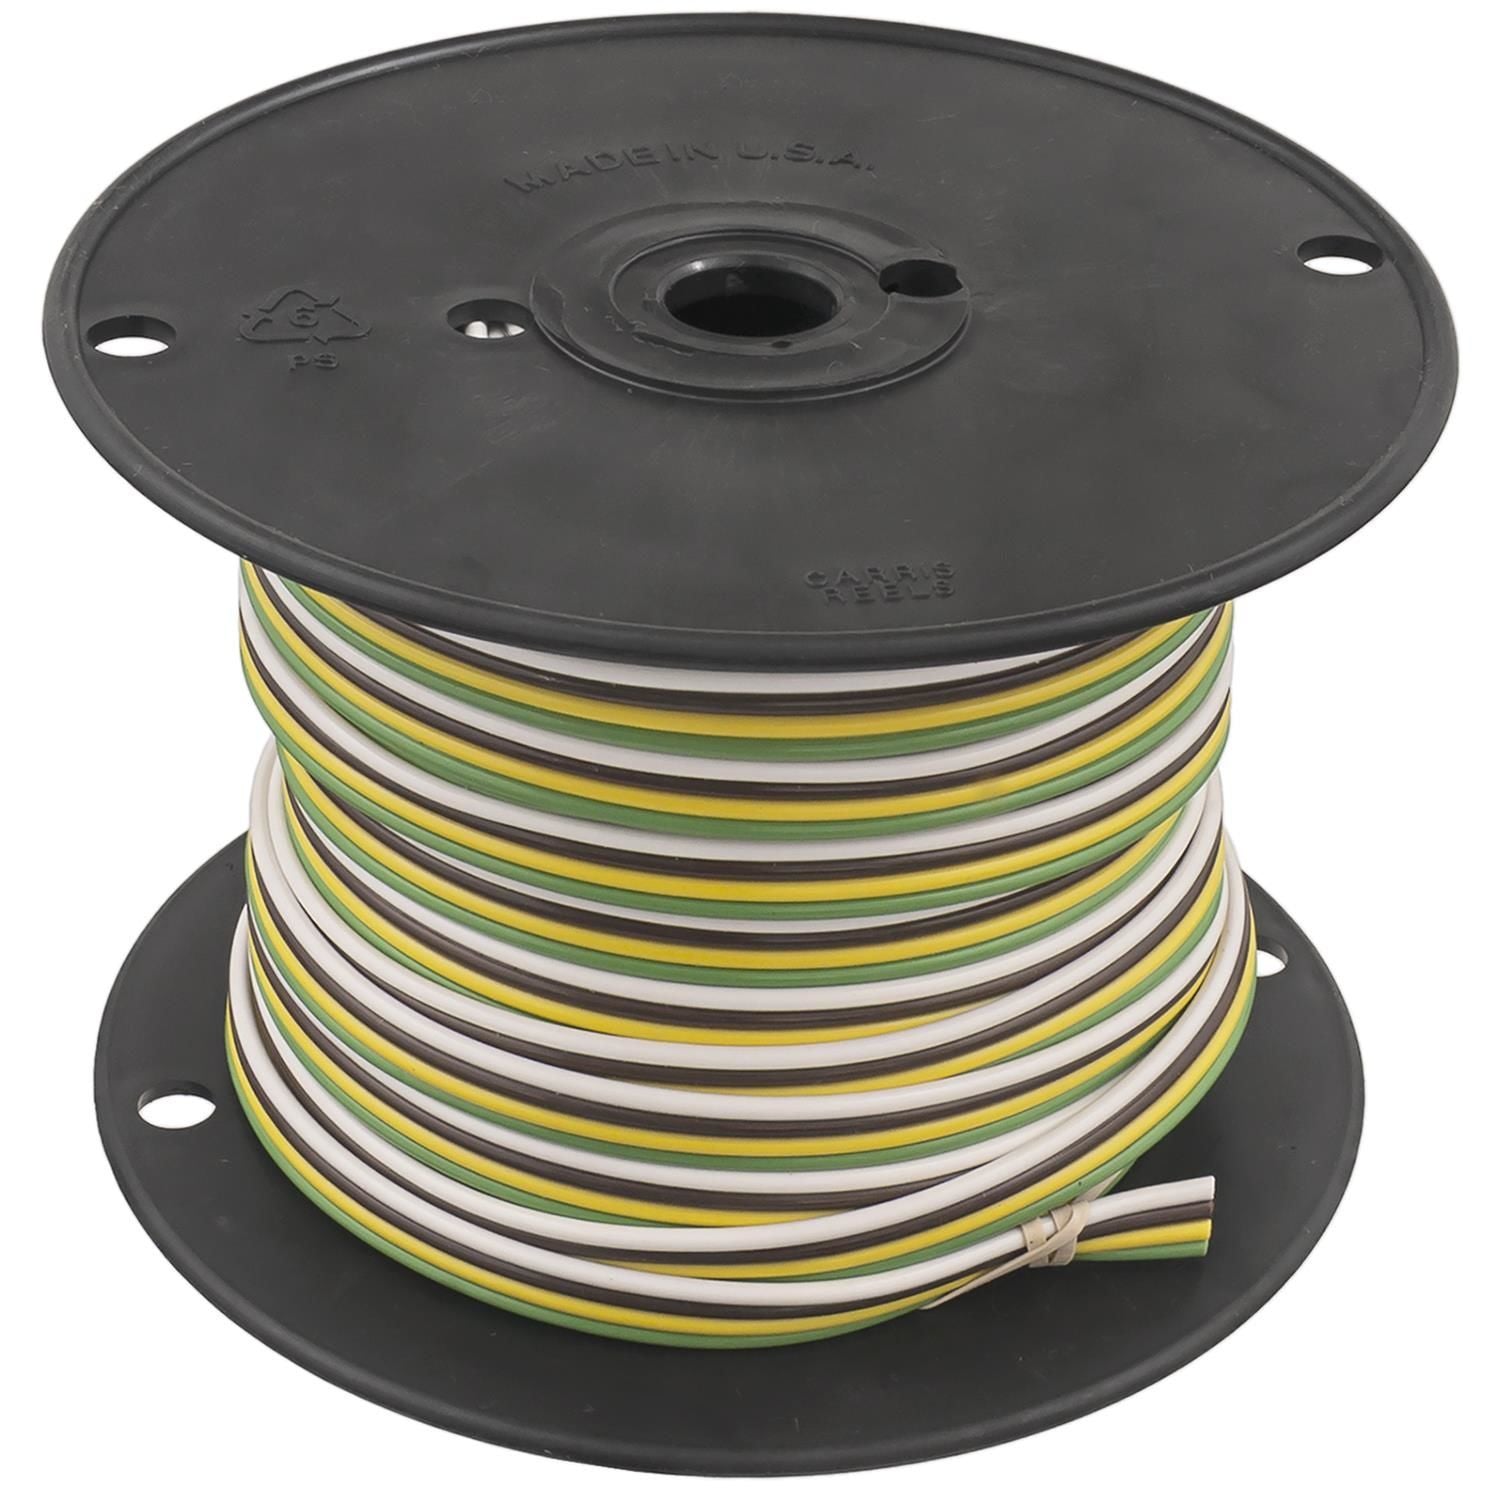 YSP WR119-100 Wells Flat Multi-Conductor Primary Wire (14G, 4 Wire)